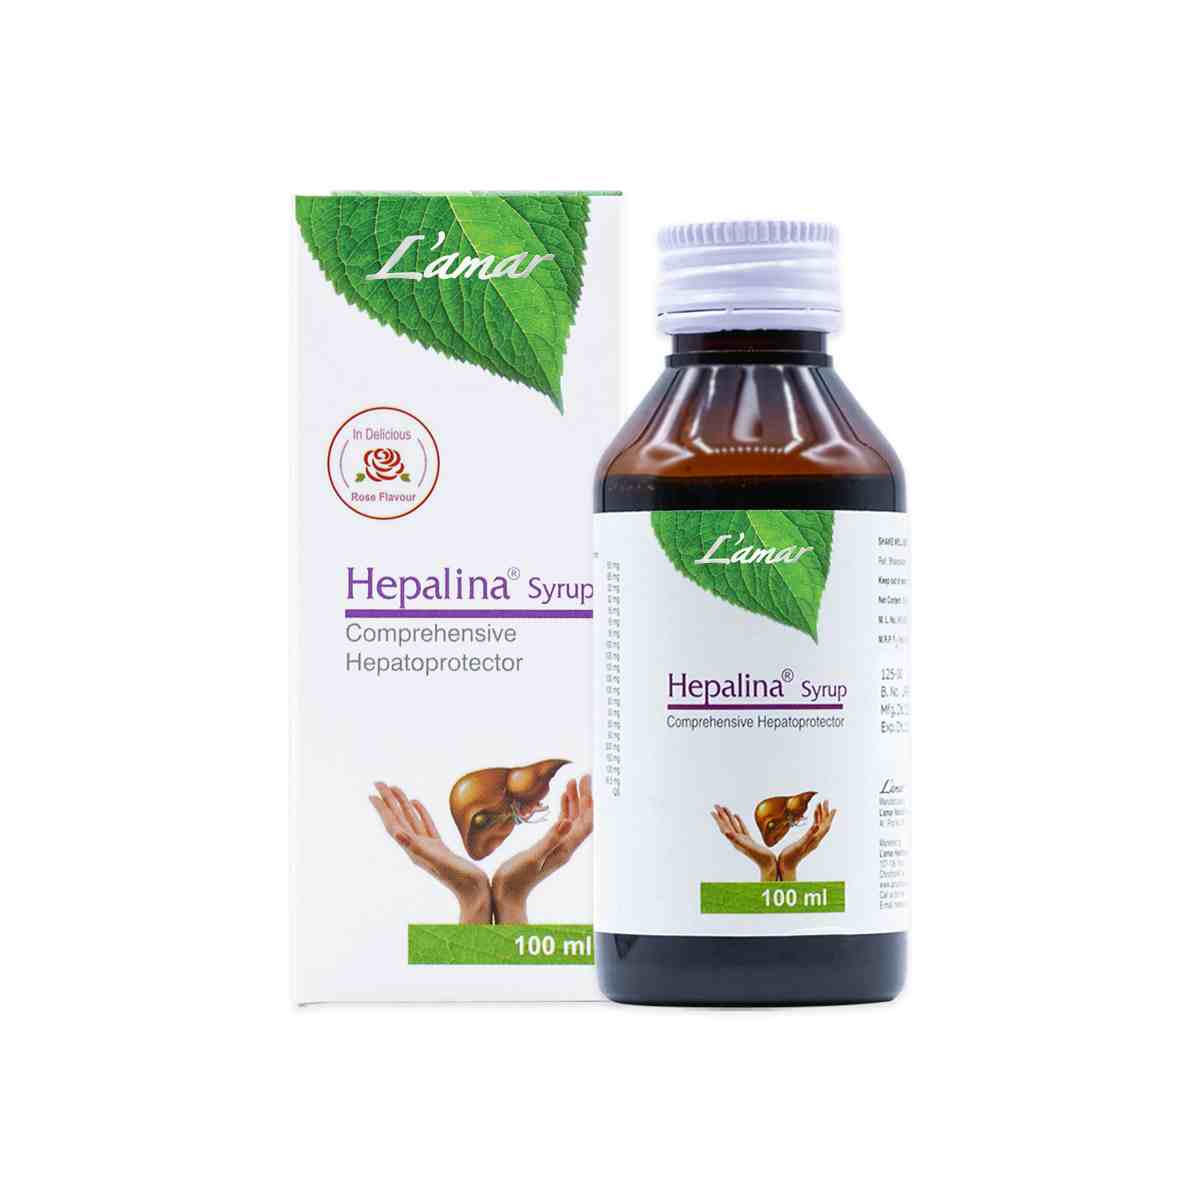 HEPALINA SYRUP 100ML - Composition